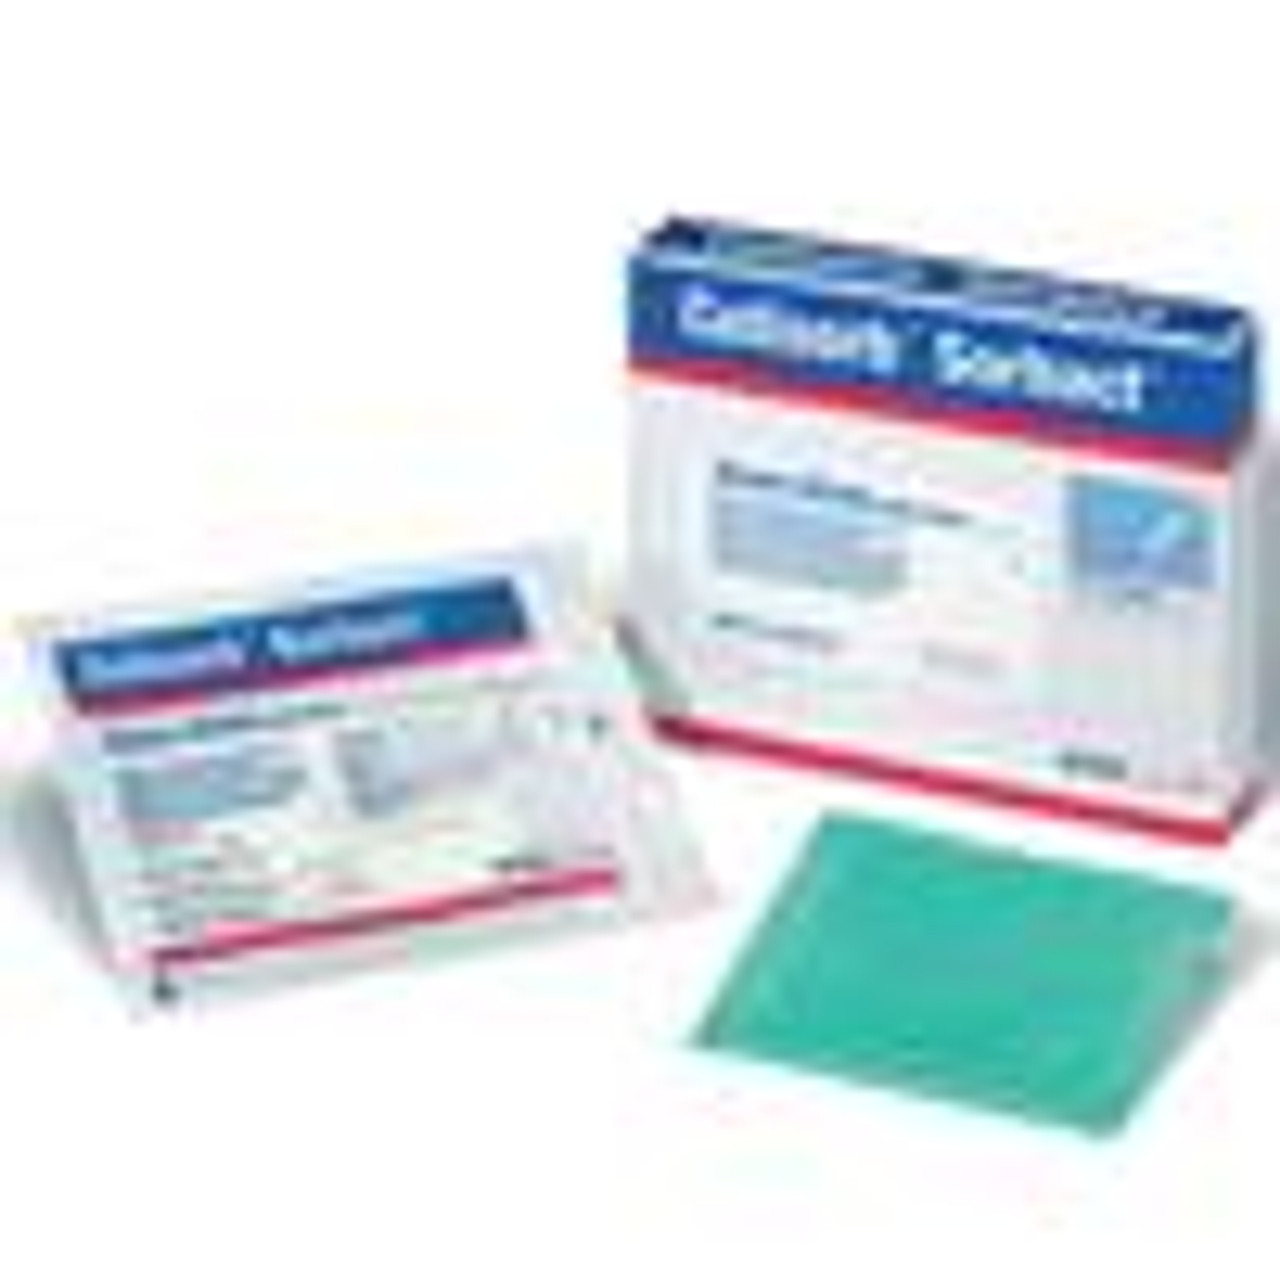 BSN 7269802 CUTIMED SORBION SORBACT ANTIMICROBIAL DRESSING WITH DACC, STERILE, 20 CM X 20 CM BX/10 (BSN 7269802)